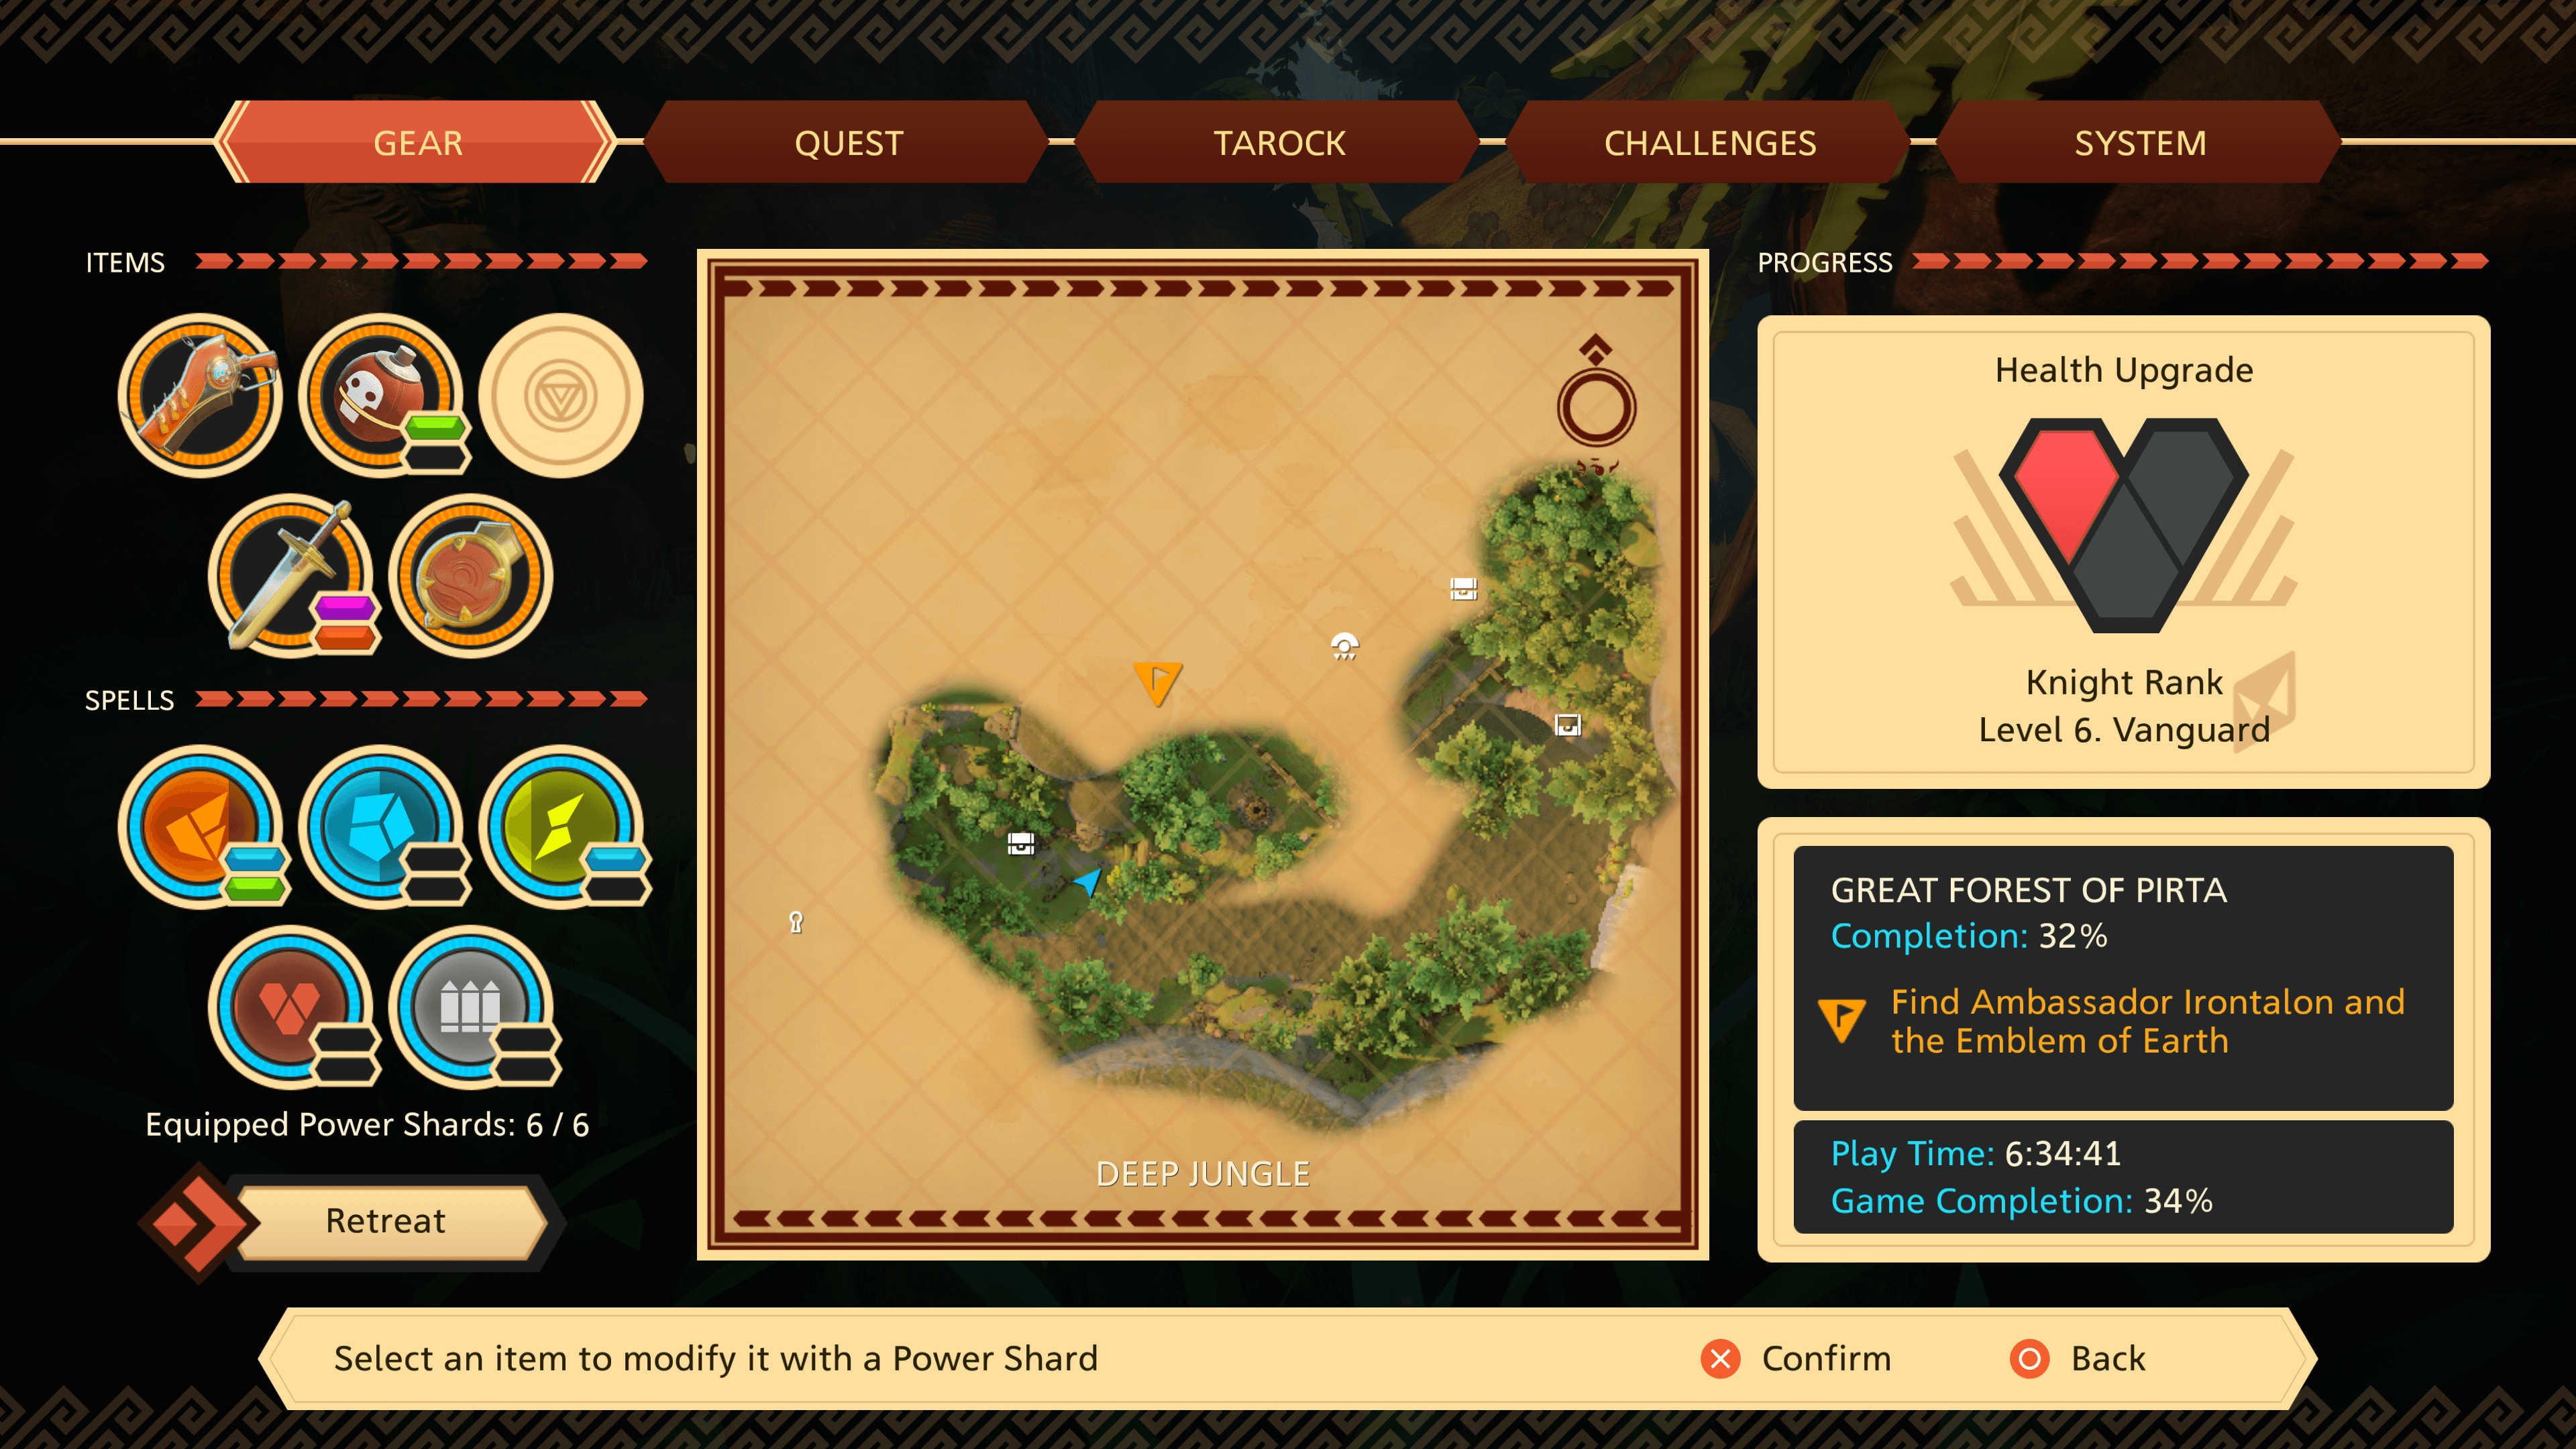 game menu in Oceanhorn 2: Knights of the Lost Realm. The layout shows 5 tabs across the top - Gear (Currently selected), Quest, Tarlock, Challangesand System. Bellow these tab are 3 separate columns: Left - shows icons for items and their upgrades, Middle - is the world map showing uncovered area, player location and points of interest. Right - player progress showing character level, current quest, overall playtime and overall completion percentage